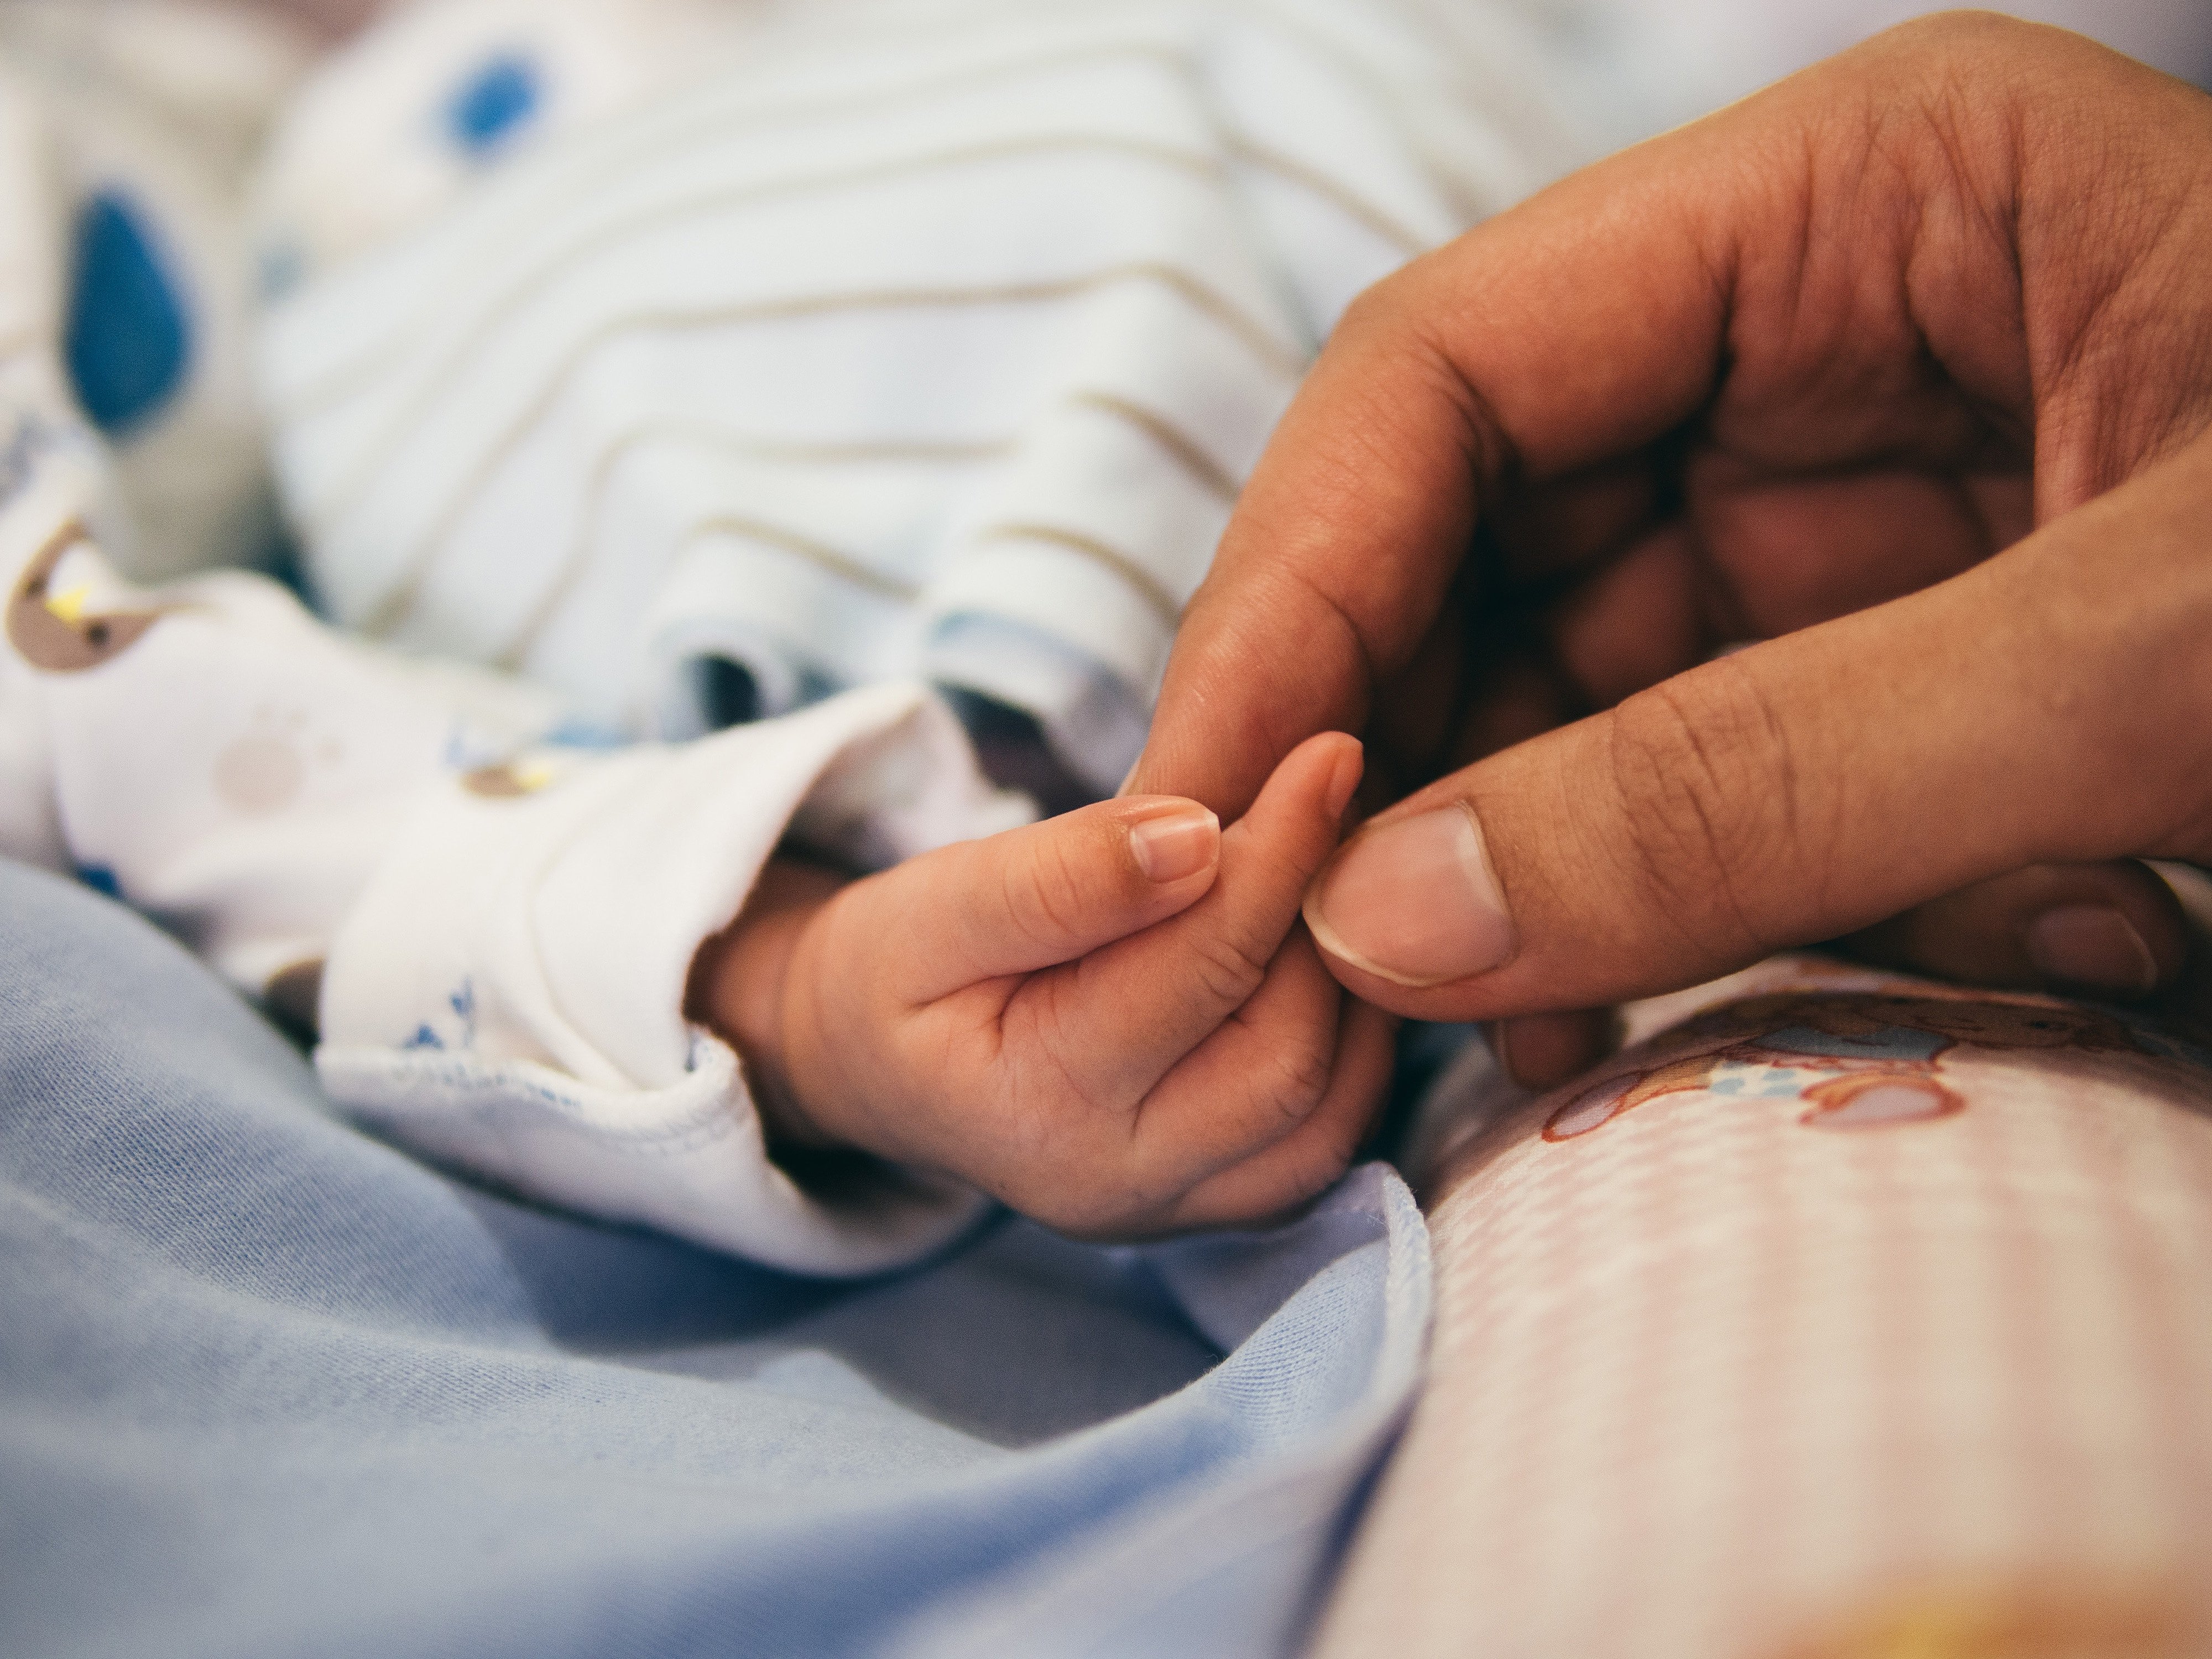 A lady holding a baby's hand in the hospital | Photo by Aditya Romansa on Unsplash